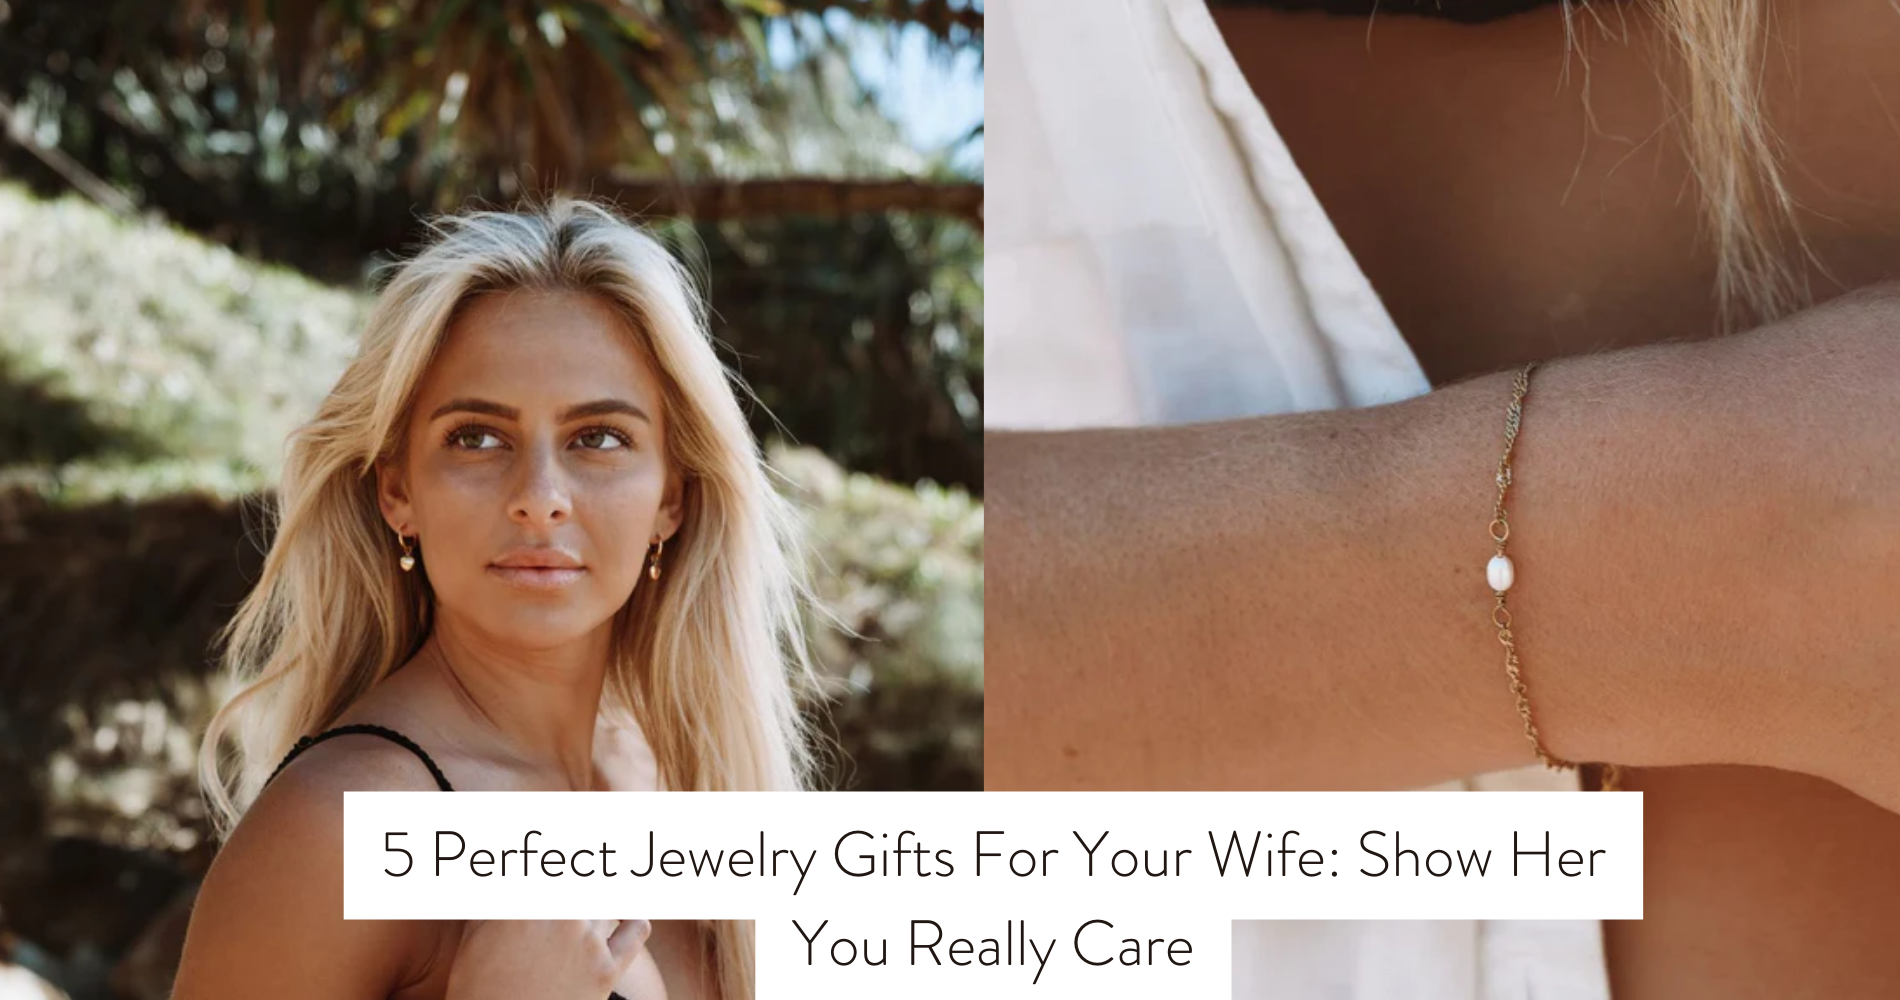 5 Perfect Jewelry Gifts For Your Wife: Show Her You Really Care